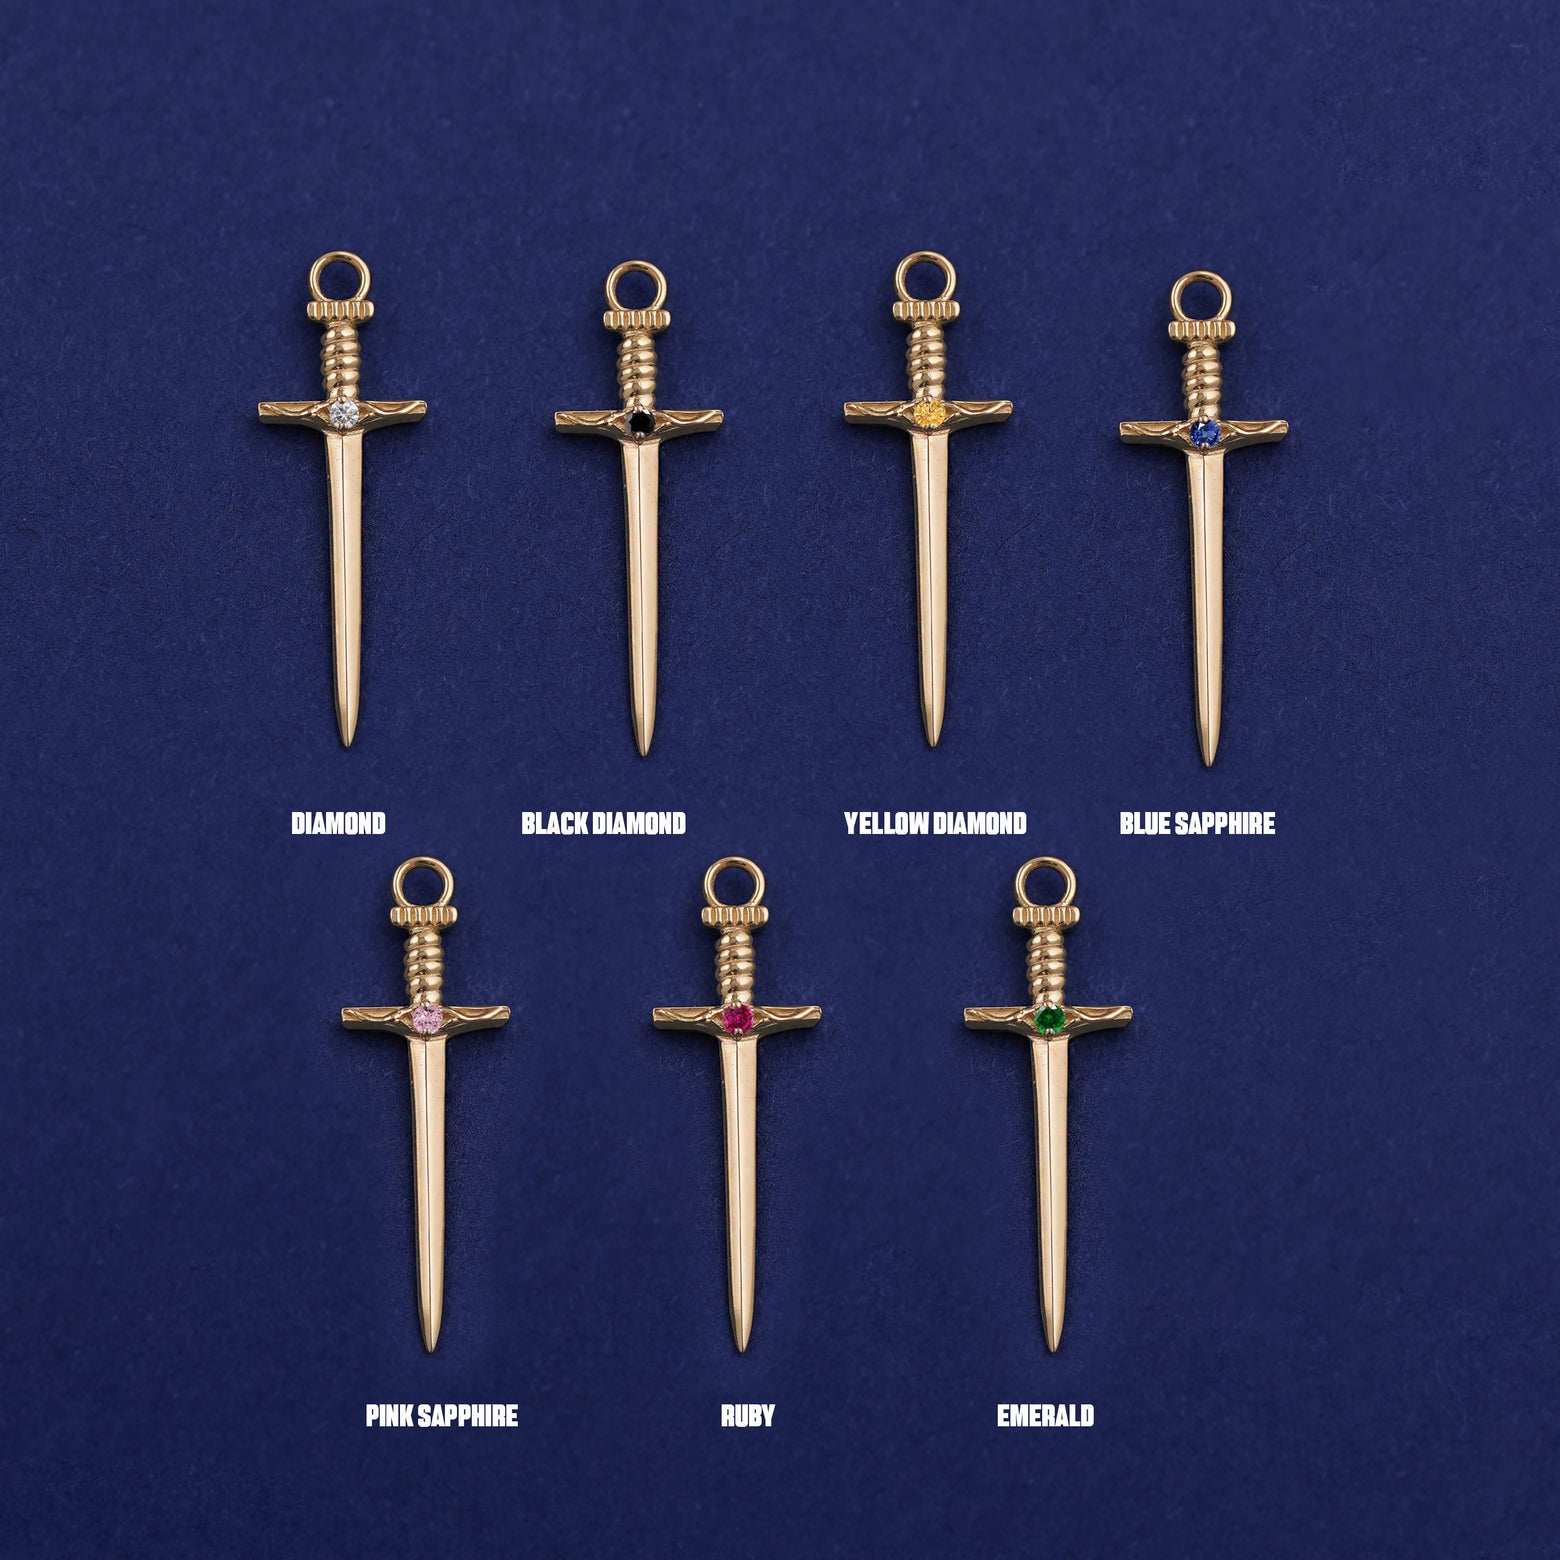 Seven versions of the Sword Charm showing all the gemstone options laid out on a dark blue background